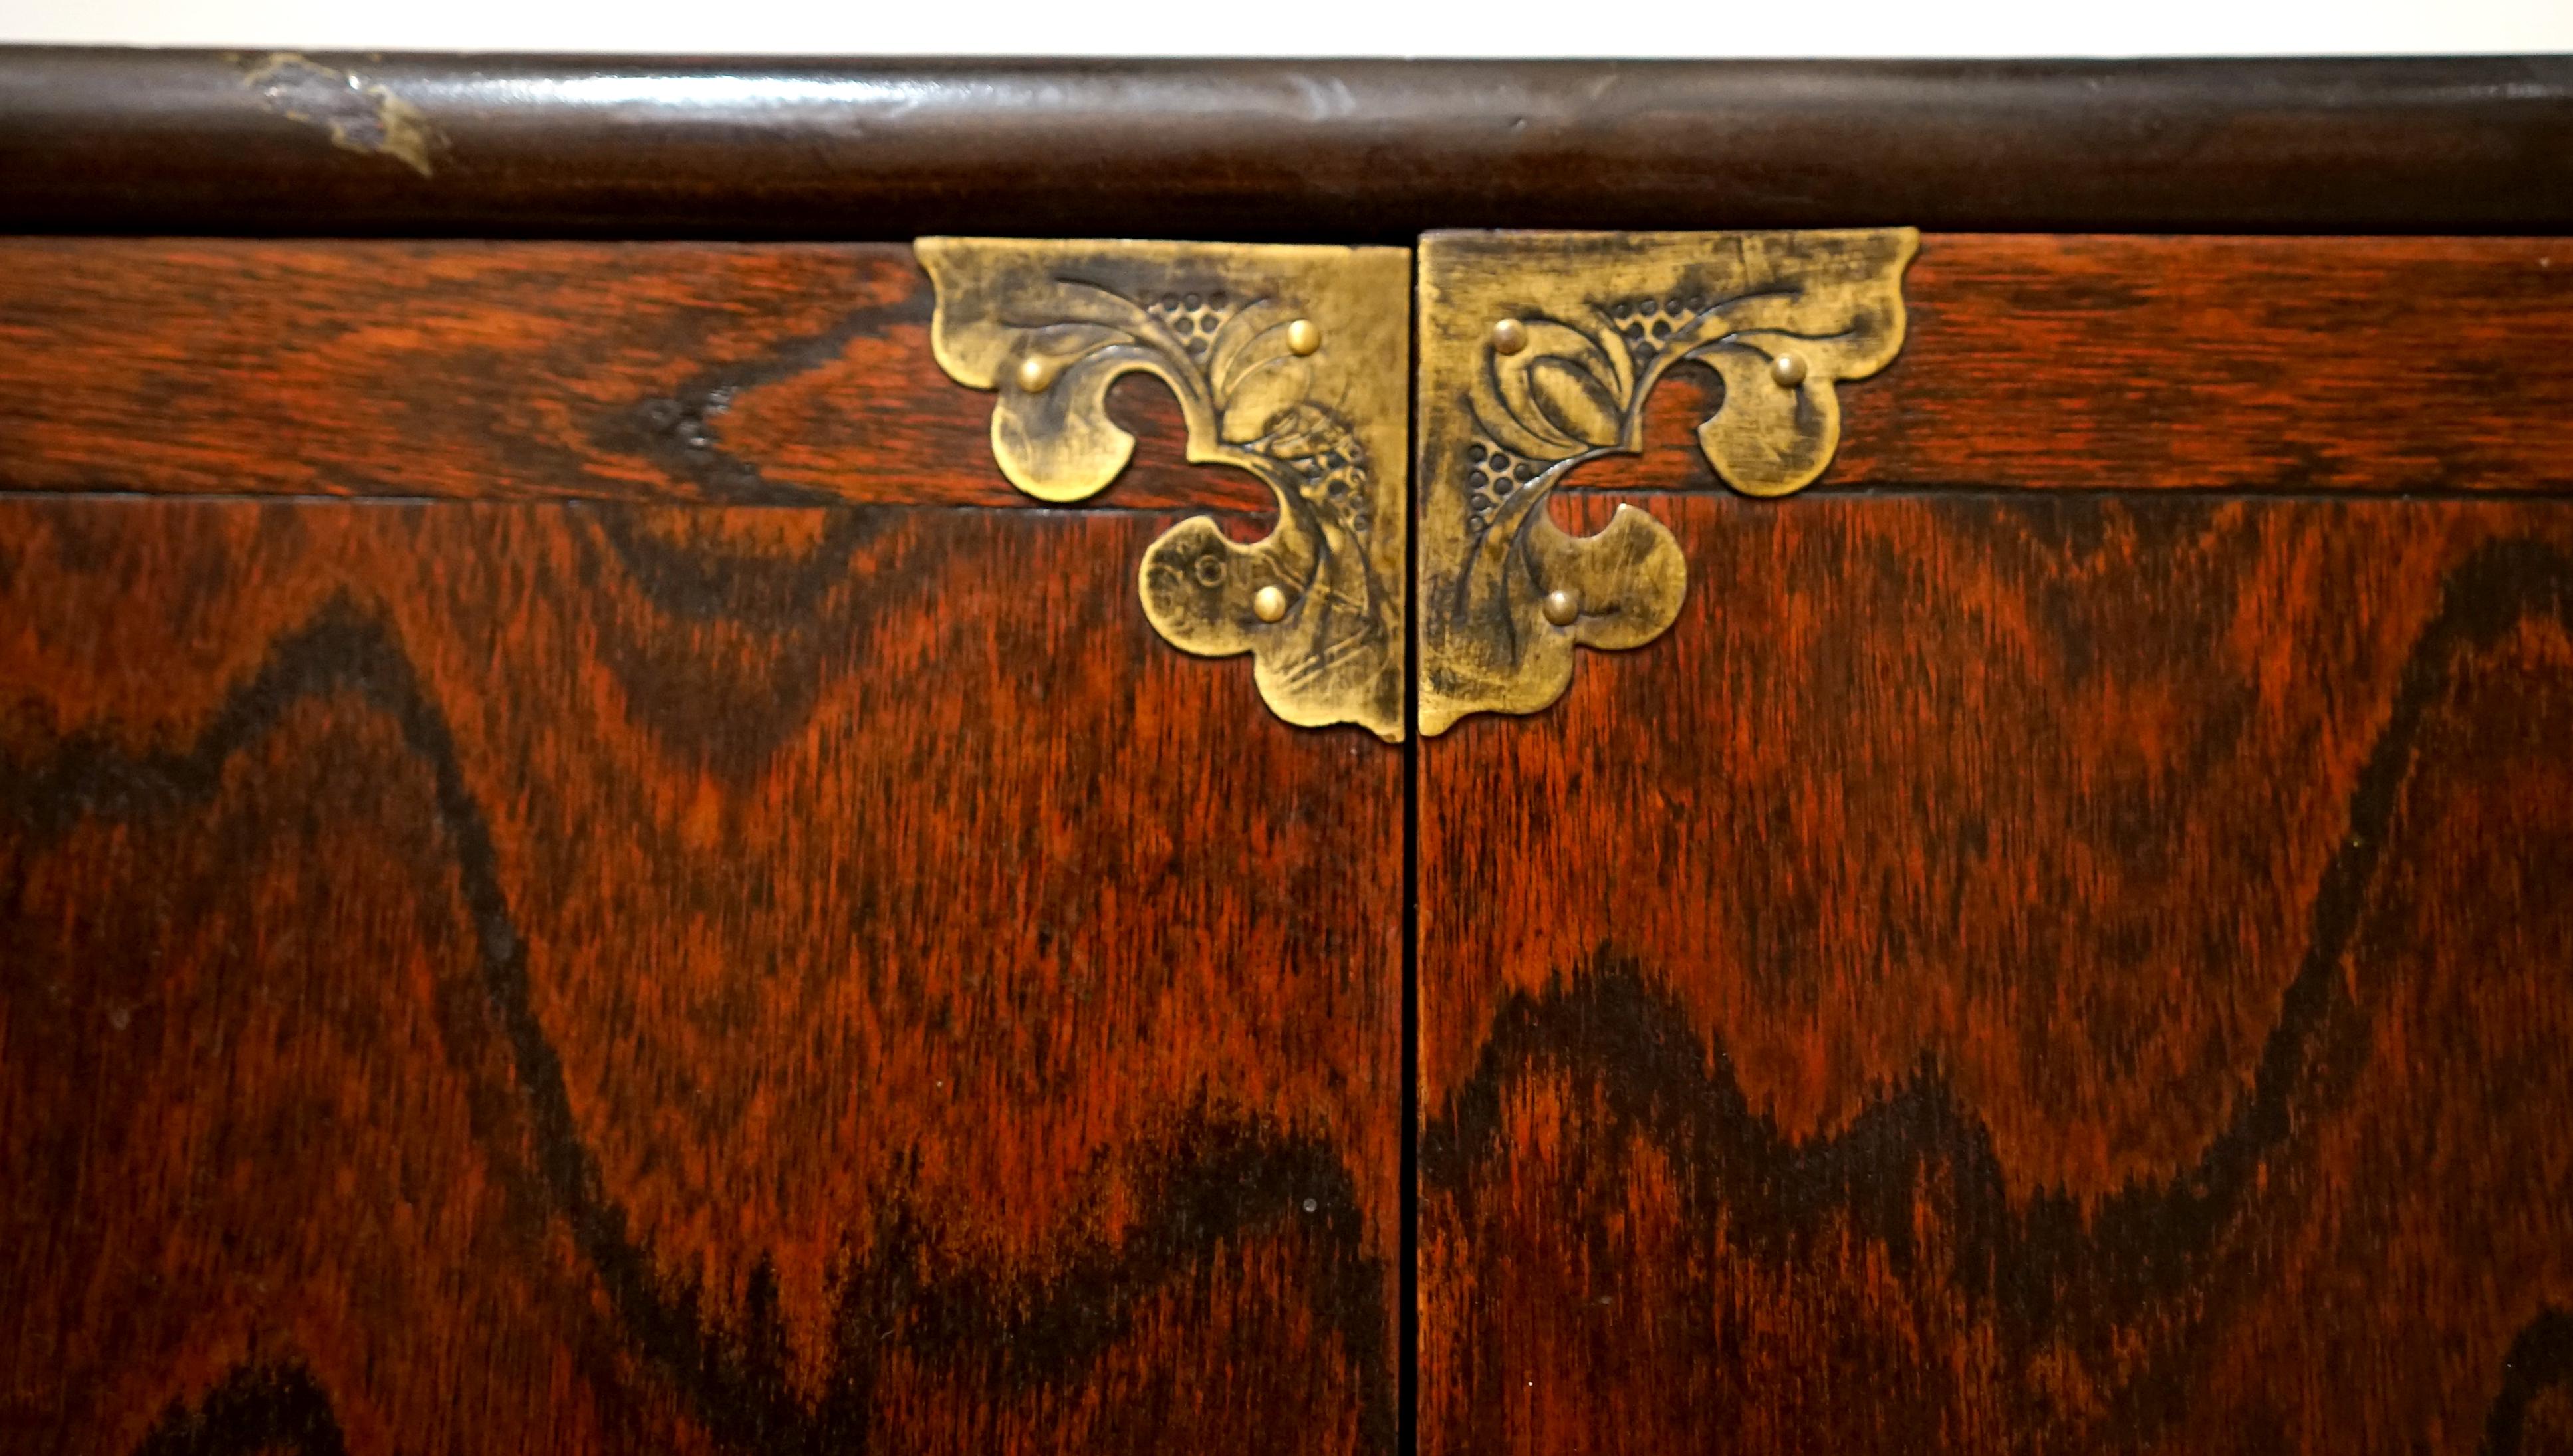 Vintage Burl Mahogany Tansu Chest with Paper Antique Calligraphy Lining In Good Condition For Sale In Lomita, CA